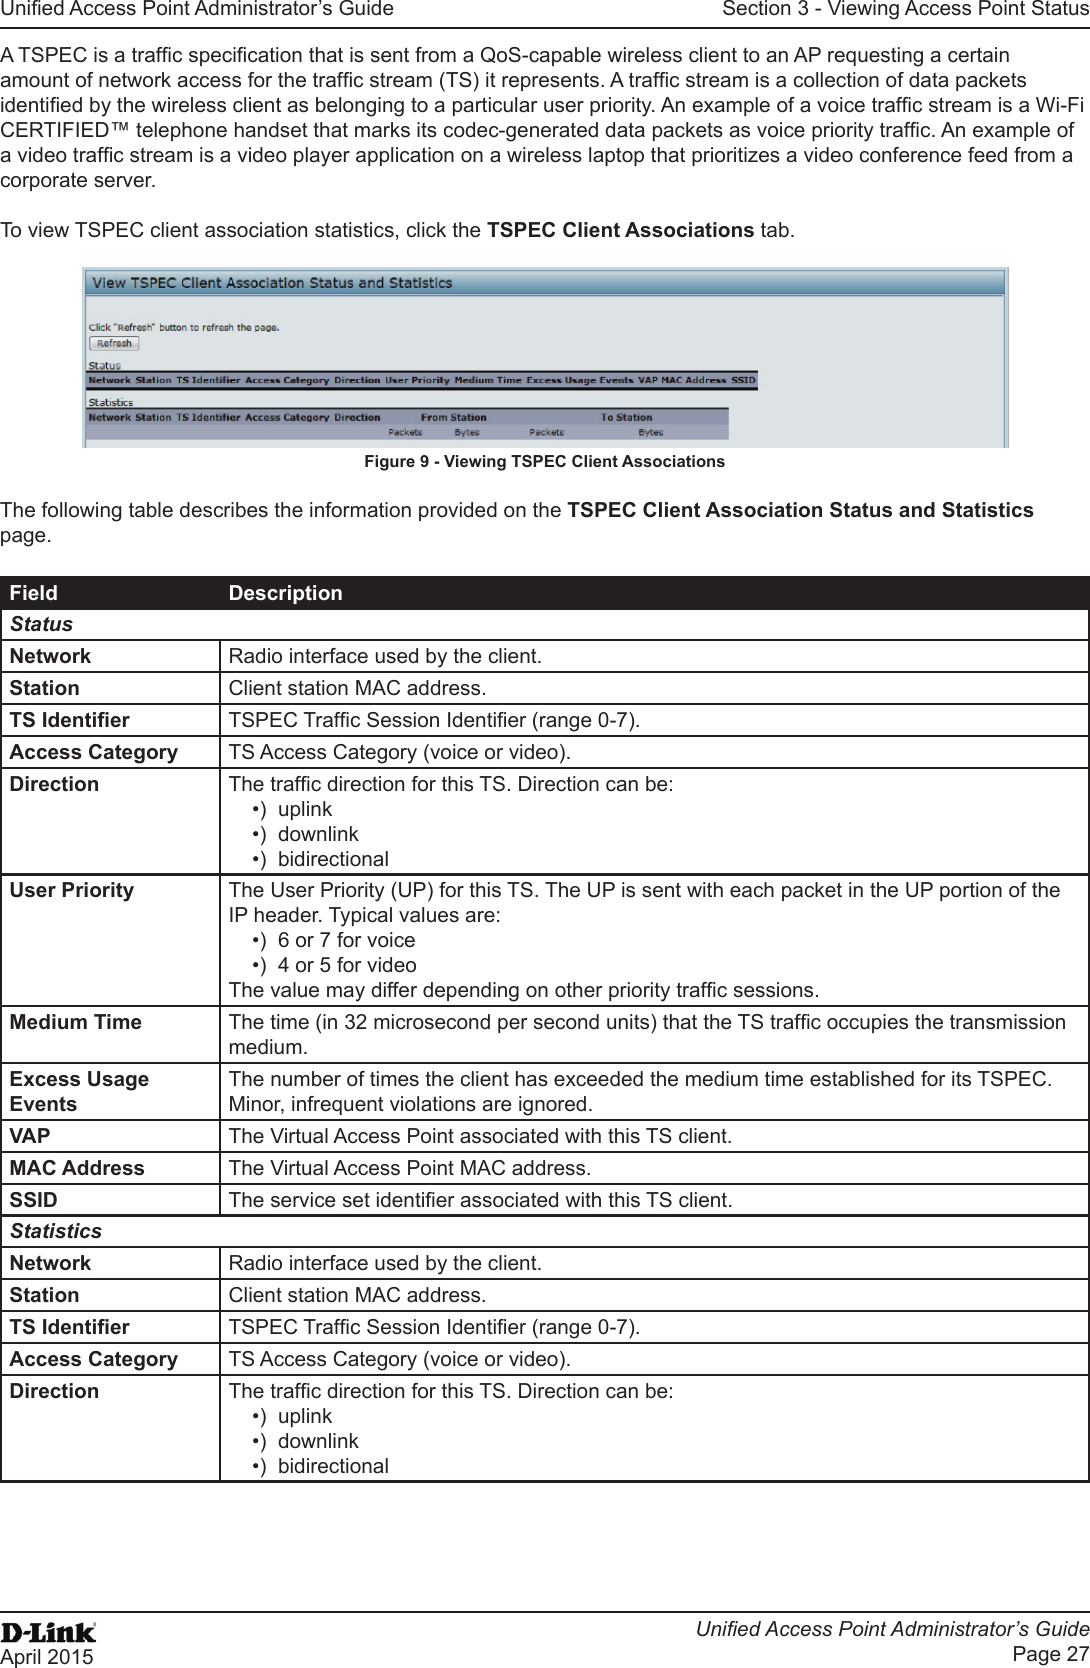 Unied Access Point Administrator’s GuideUnied Access Point Administrator’s GuidePage 27April 2015Section 3 - Viewing Access Point StatusA TSPEC is a trafc specication that is sent from a QoS-capable wireless client to an AP requesting a certain amount of network access for the trafc stream (TS) it represents. A trafc stream is a collection of data packets identied by the wireless client as belonging to a particular user priority. An example of a voice trafc stream is a Wi-Fi CERTIFIED™ telephone handset that marks its codec-generated data packets as voice priority trafc. An example of a video trafc stream is a video player application on a wireless laptop that prioritizes a video conference feed from a corporate server. To view TSPEC client association statistics, click the TSPEC Client Associations tab.Figure 9 - Viewing TSPEC Client AssociationsThe following table describes the information provided on the TSPEC Client Association Status and Statistics page.Field DescriptionStatusNetwork Radio interface used by the client.Station Client station MAC address.TS Identier TSPEC Trafc Session Identier (range 0-7).Access Category TS Access Category (voice or video).Direction The trafc direction for this TS. Direction can be:•)  uplink•)  downlink•)  bidirectionalUser Priority The User Priority (UP) for this TS. The UP is sent with each packet in the UP portion of the IP header. Typical values are:•)  6 or 7 for voice•)  4 or 5 for videoThe value may differ depending on other priority trafc sessions.Medium Time The time (in 32 microsecond per second units) that the TS trafc occupies the transmission medium.Excess Usage EventsThe number of times the client has exceeded the medium time established for its TSPEC. Minor, infrequent violations are ignored.VAP The Virtual Access Point associated with this TS client.MAC Address The Virtual Access Point MAC address.SSID The service set identier associated with this TS client.StatisticsNetwork Radio interface used by the client.Station Client station MAC address.TS Identier TSPEC Trafc Session Identier (range 0-7).Access Category TS Access Category (voice or video).Direction The trafc direction for this TS. Direction can be:•)  uplink•)  downlink•)  bidirectional